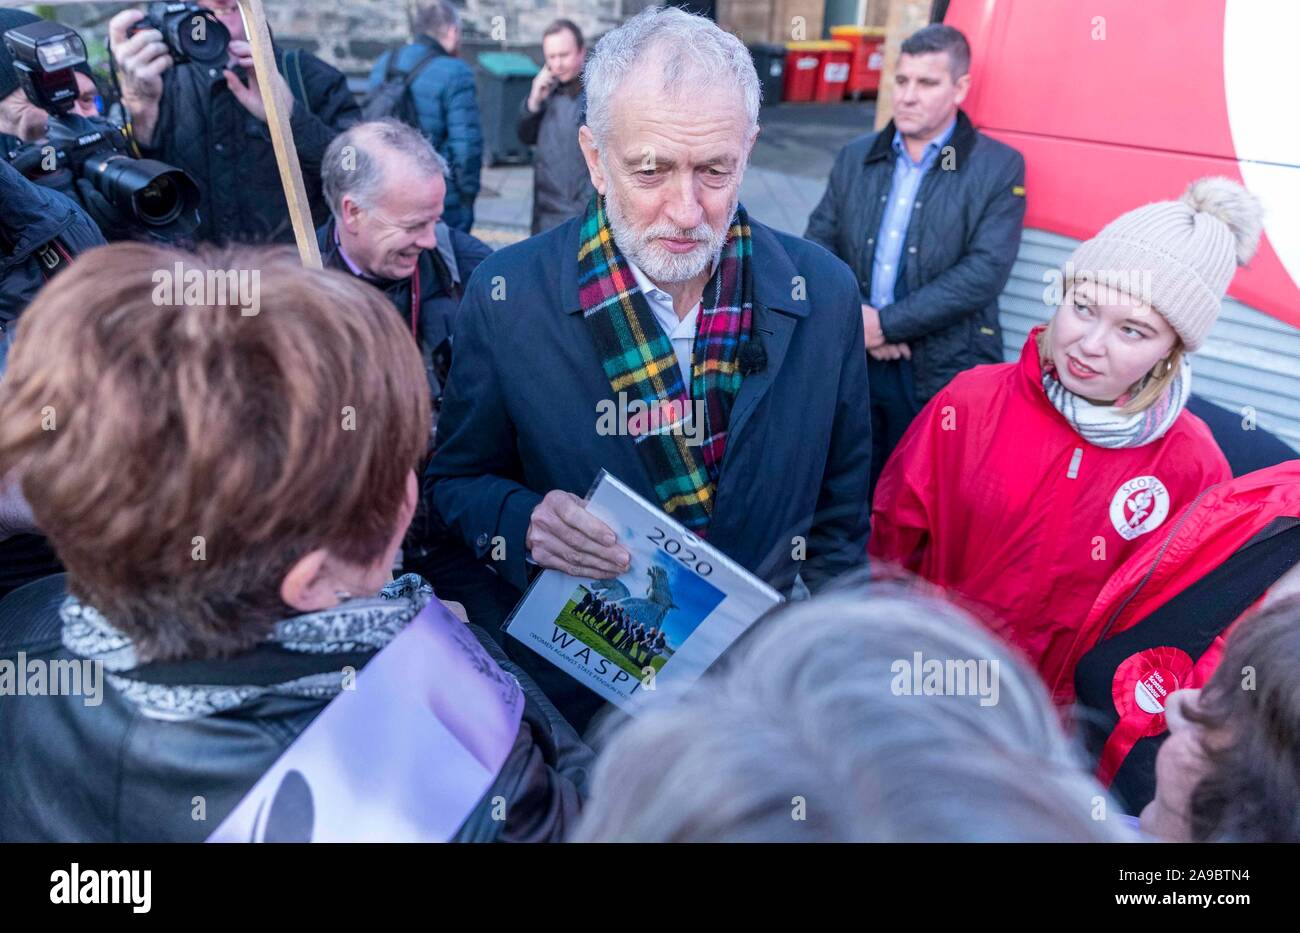 Linlithgow, United Kingdom. 14 November, 2019 Pictured: Jeremy Corbyn at Linlithgow Cross in Linlithgow. Labour leader, Jeremy Corbyn continues his visit to Scotland as part of his UK Election campaign. Credit: Rich Dyson/Alamy Live News Stock Photo